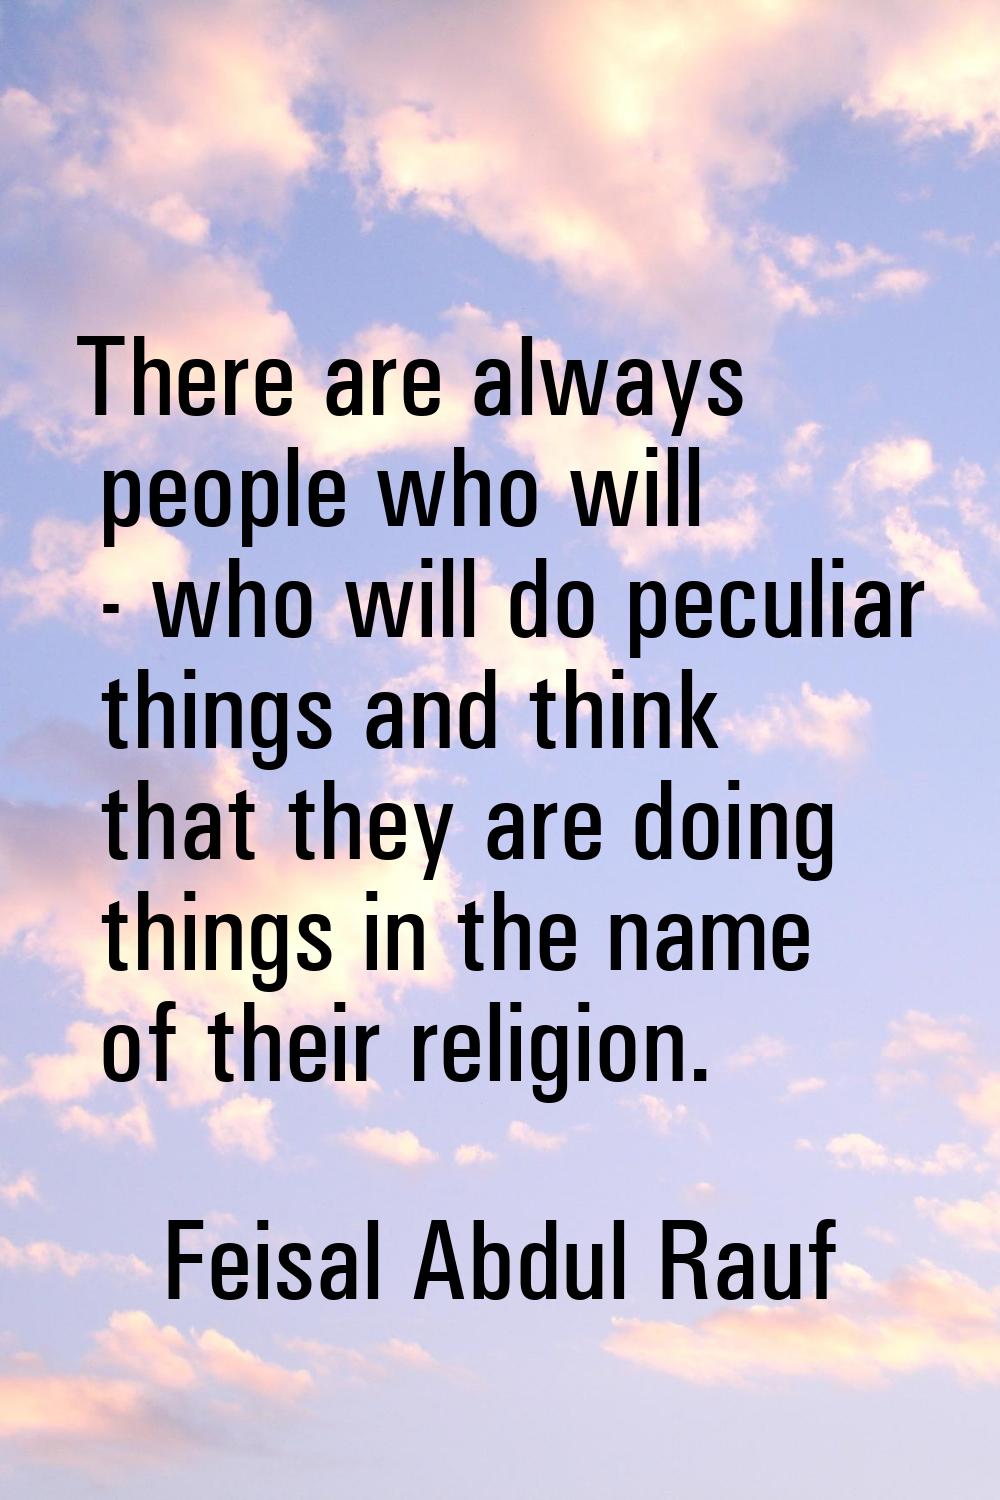 There are always people who will - who will do peculiar things and think that they are doing things